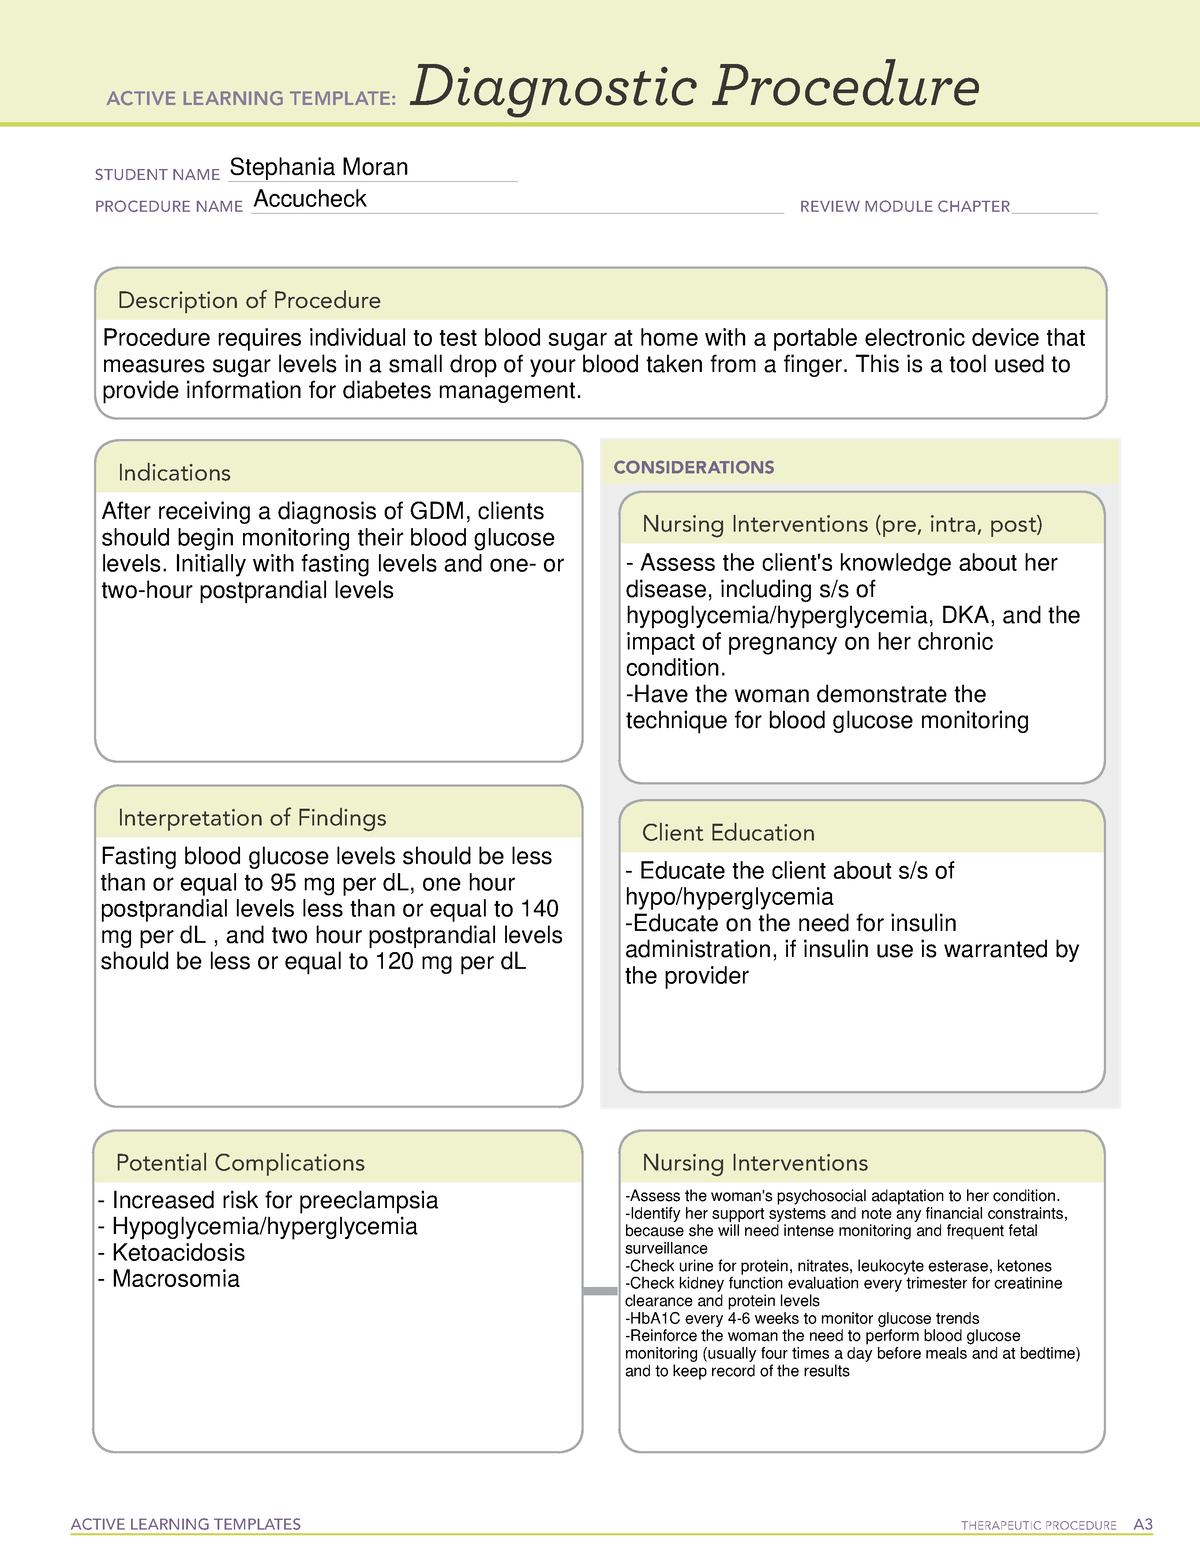 diagnostic-procedure-template-accucheck-active-learning-templates